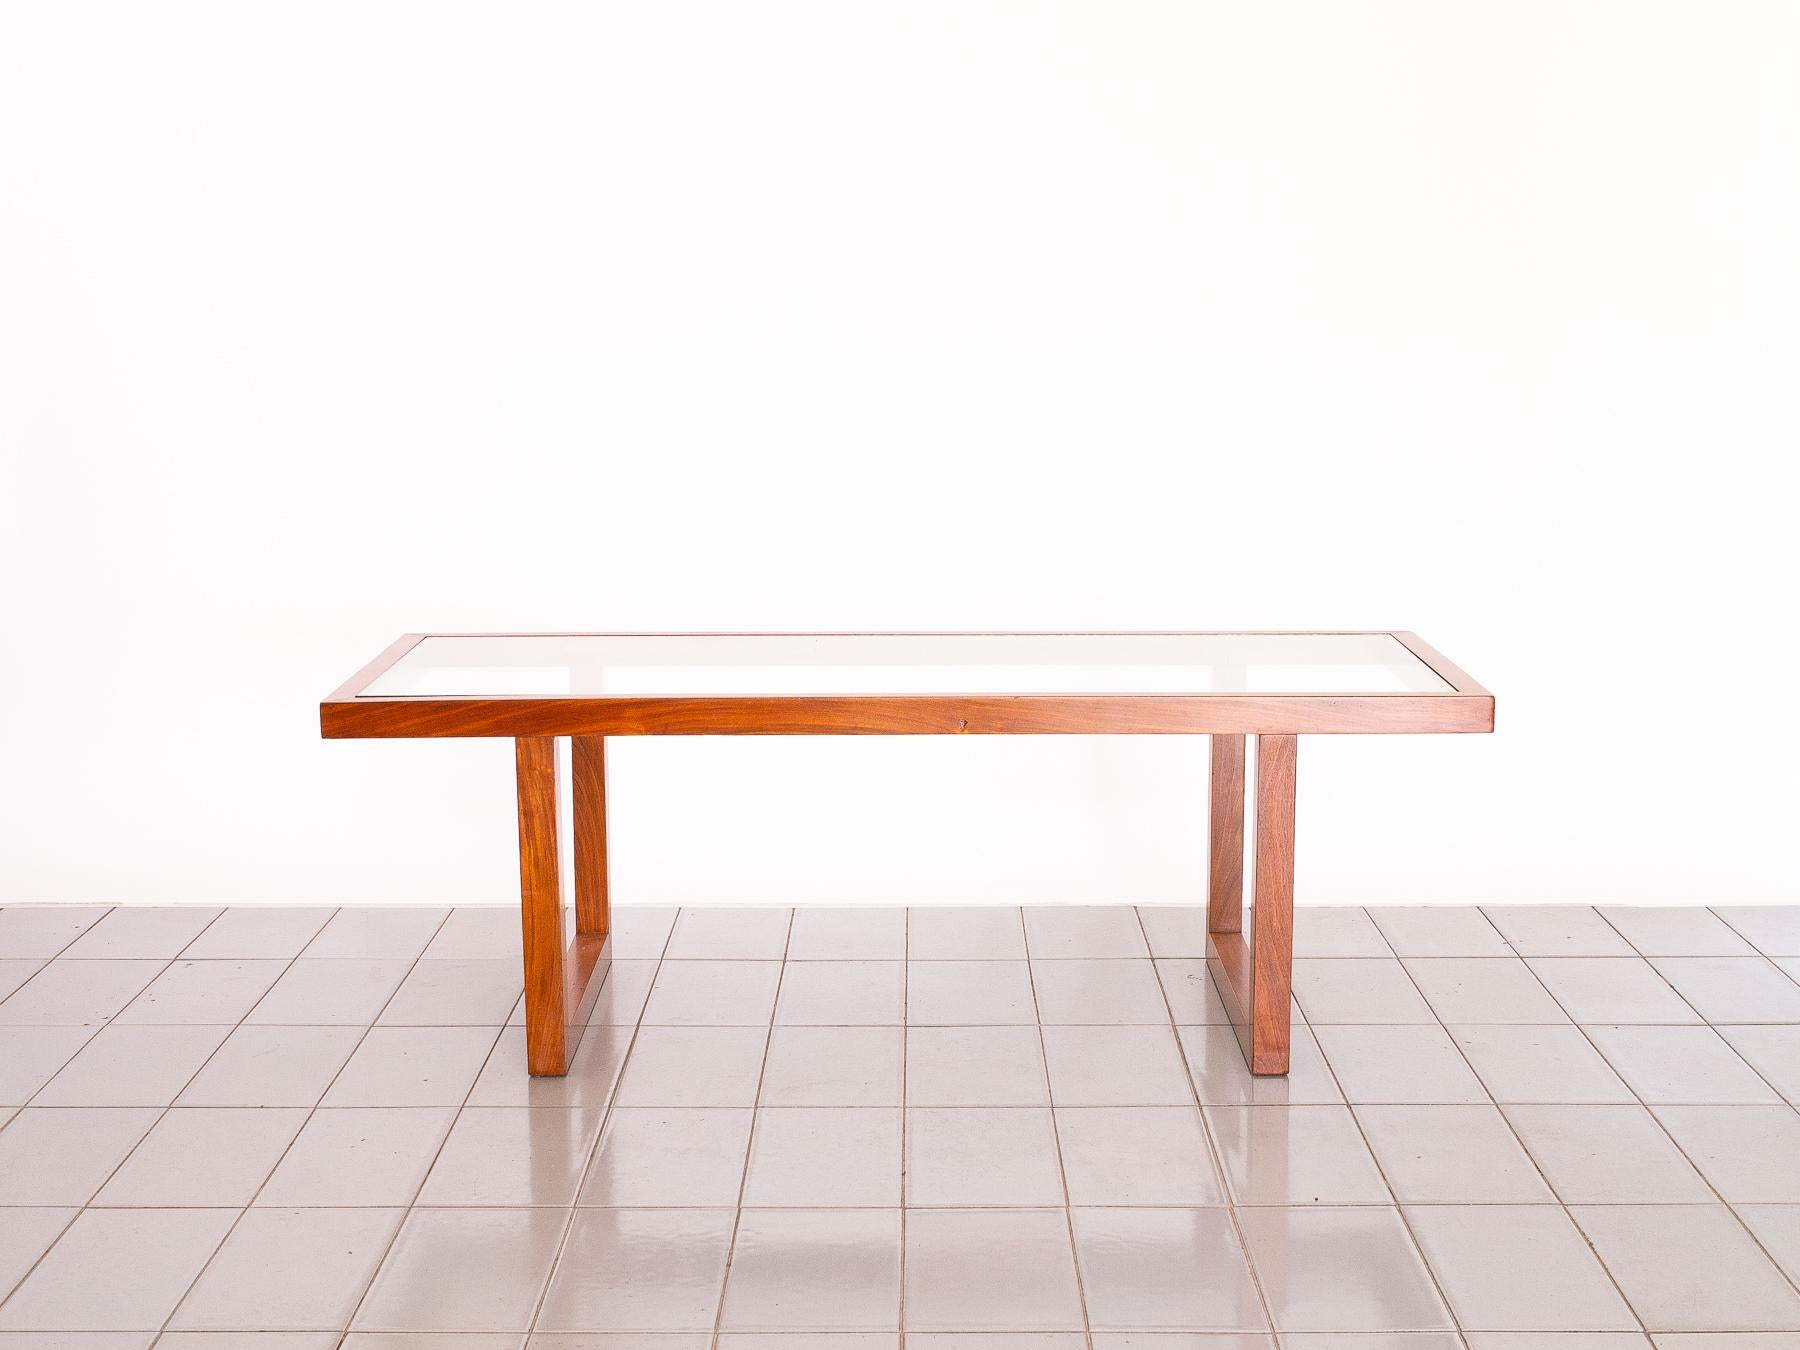 This beautiful 1960's coffee table has all the characteristics of Tenreiro's work: perfect mitter joints, flush glass alignment, elegance. This coffee table is very similar to several of his rectangular coffee tables. Great for small lounges or for